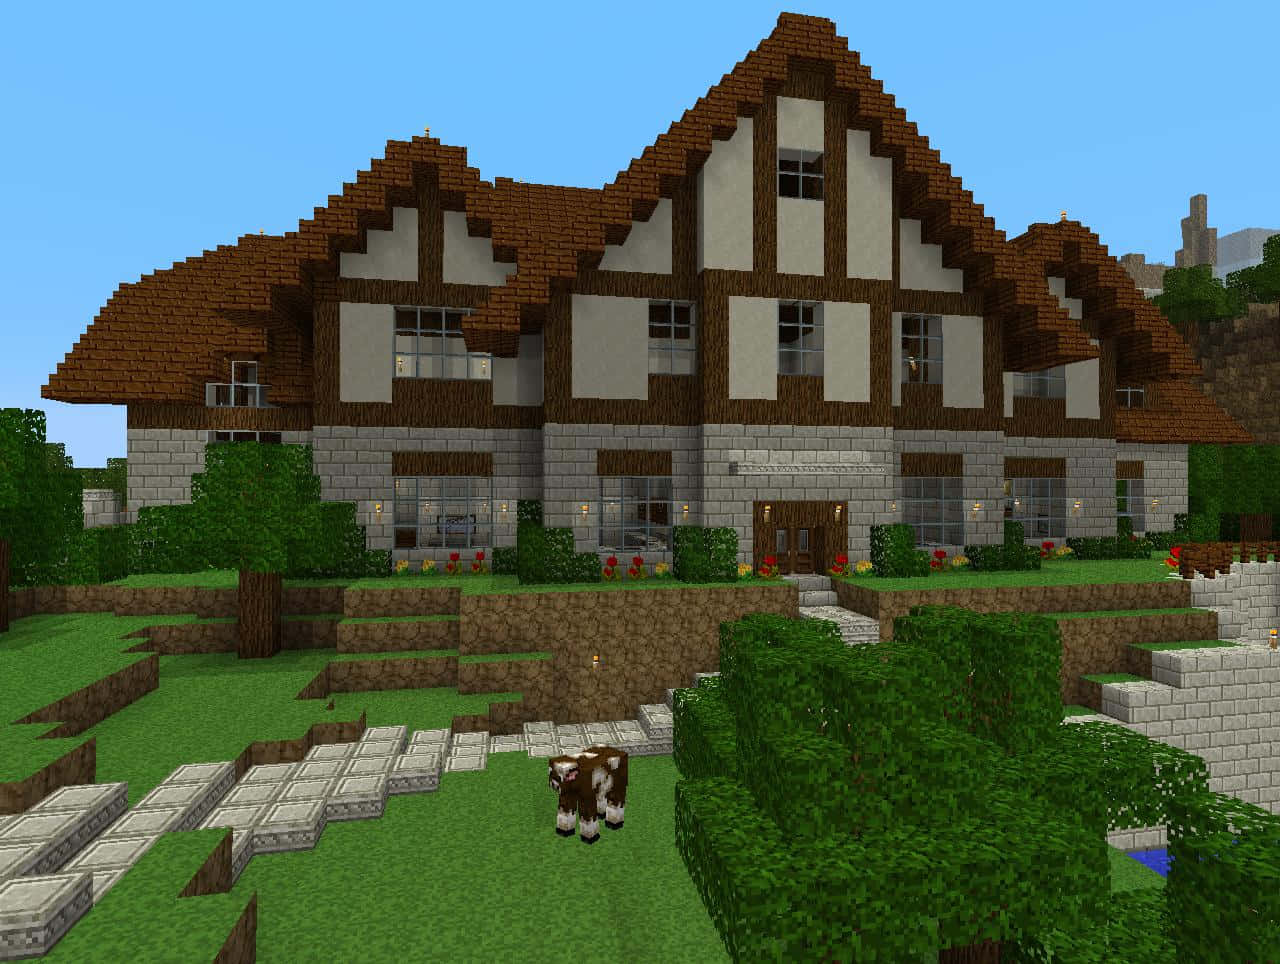 A hand crafted Minecraft House built with redstone and quartz blocks.